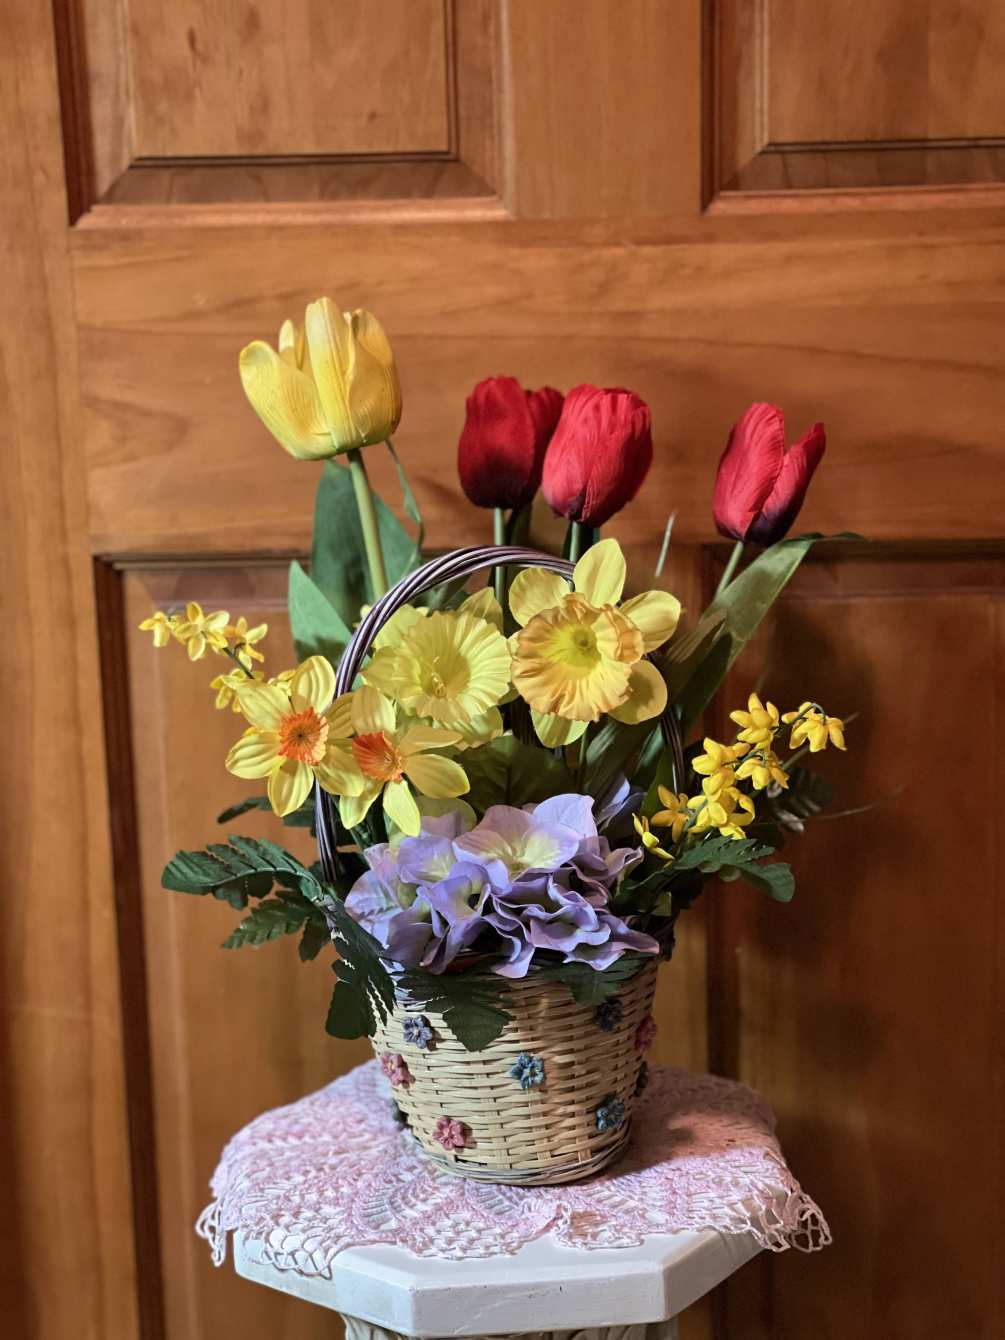 A keepsake arrangement to be proudly brought out every Spring. Wonderful yellow